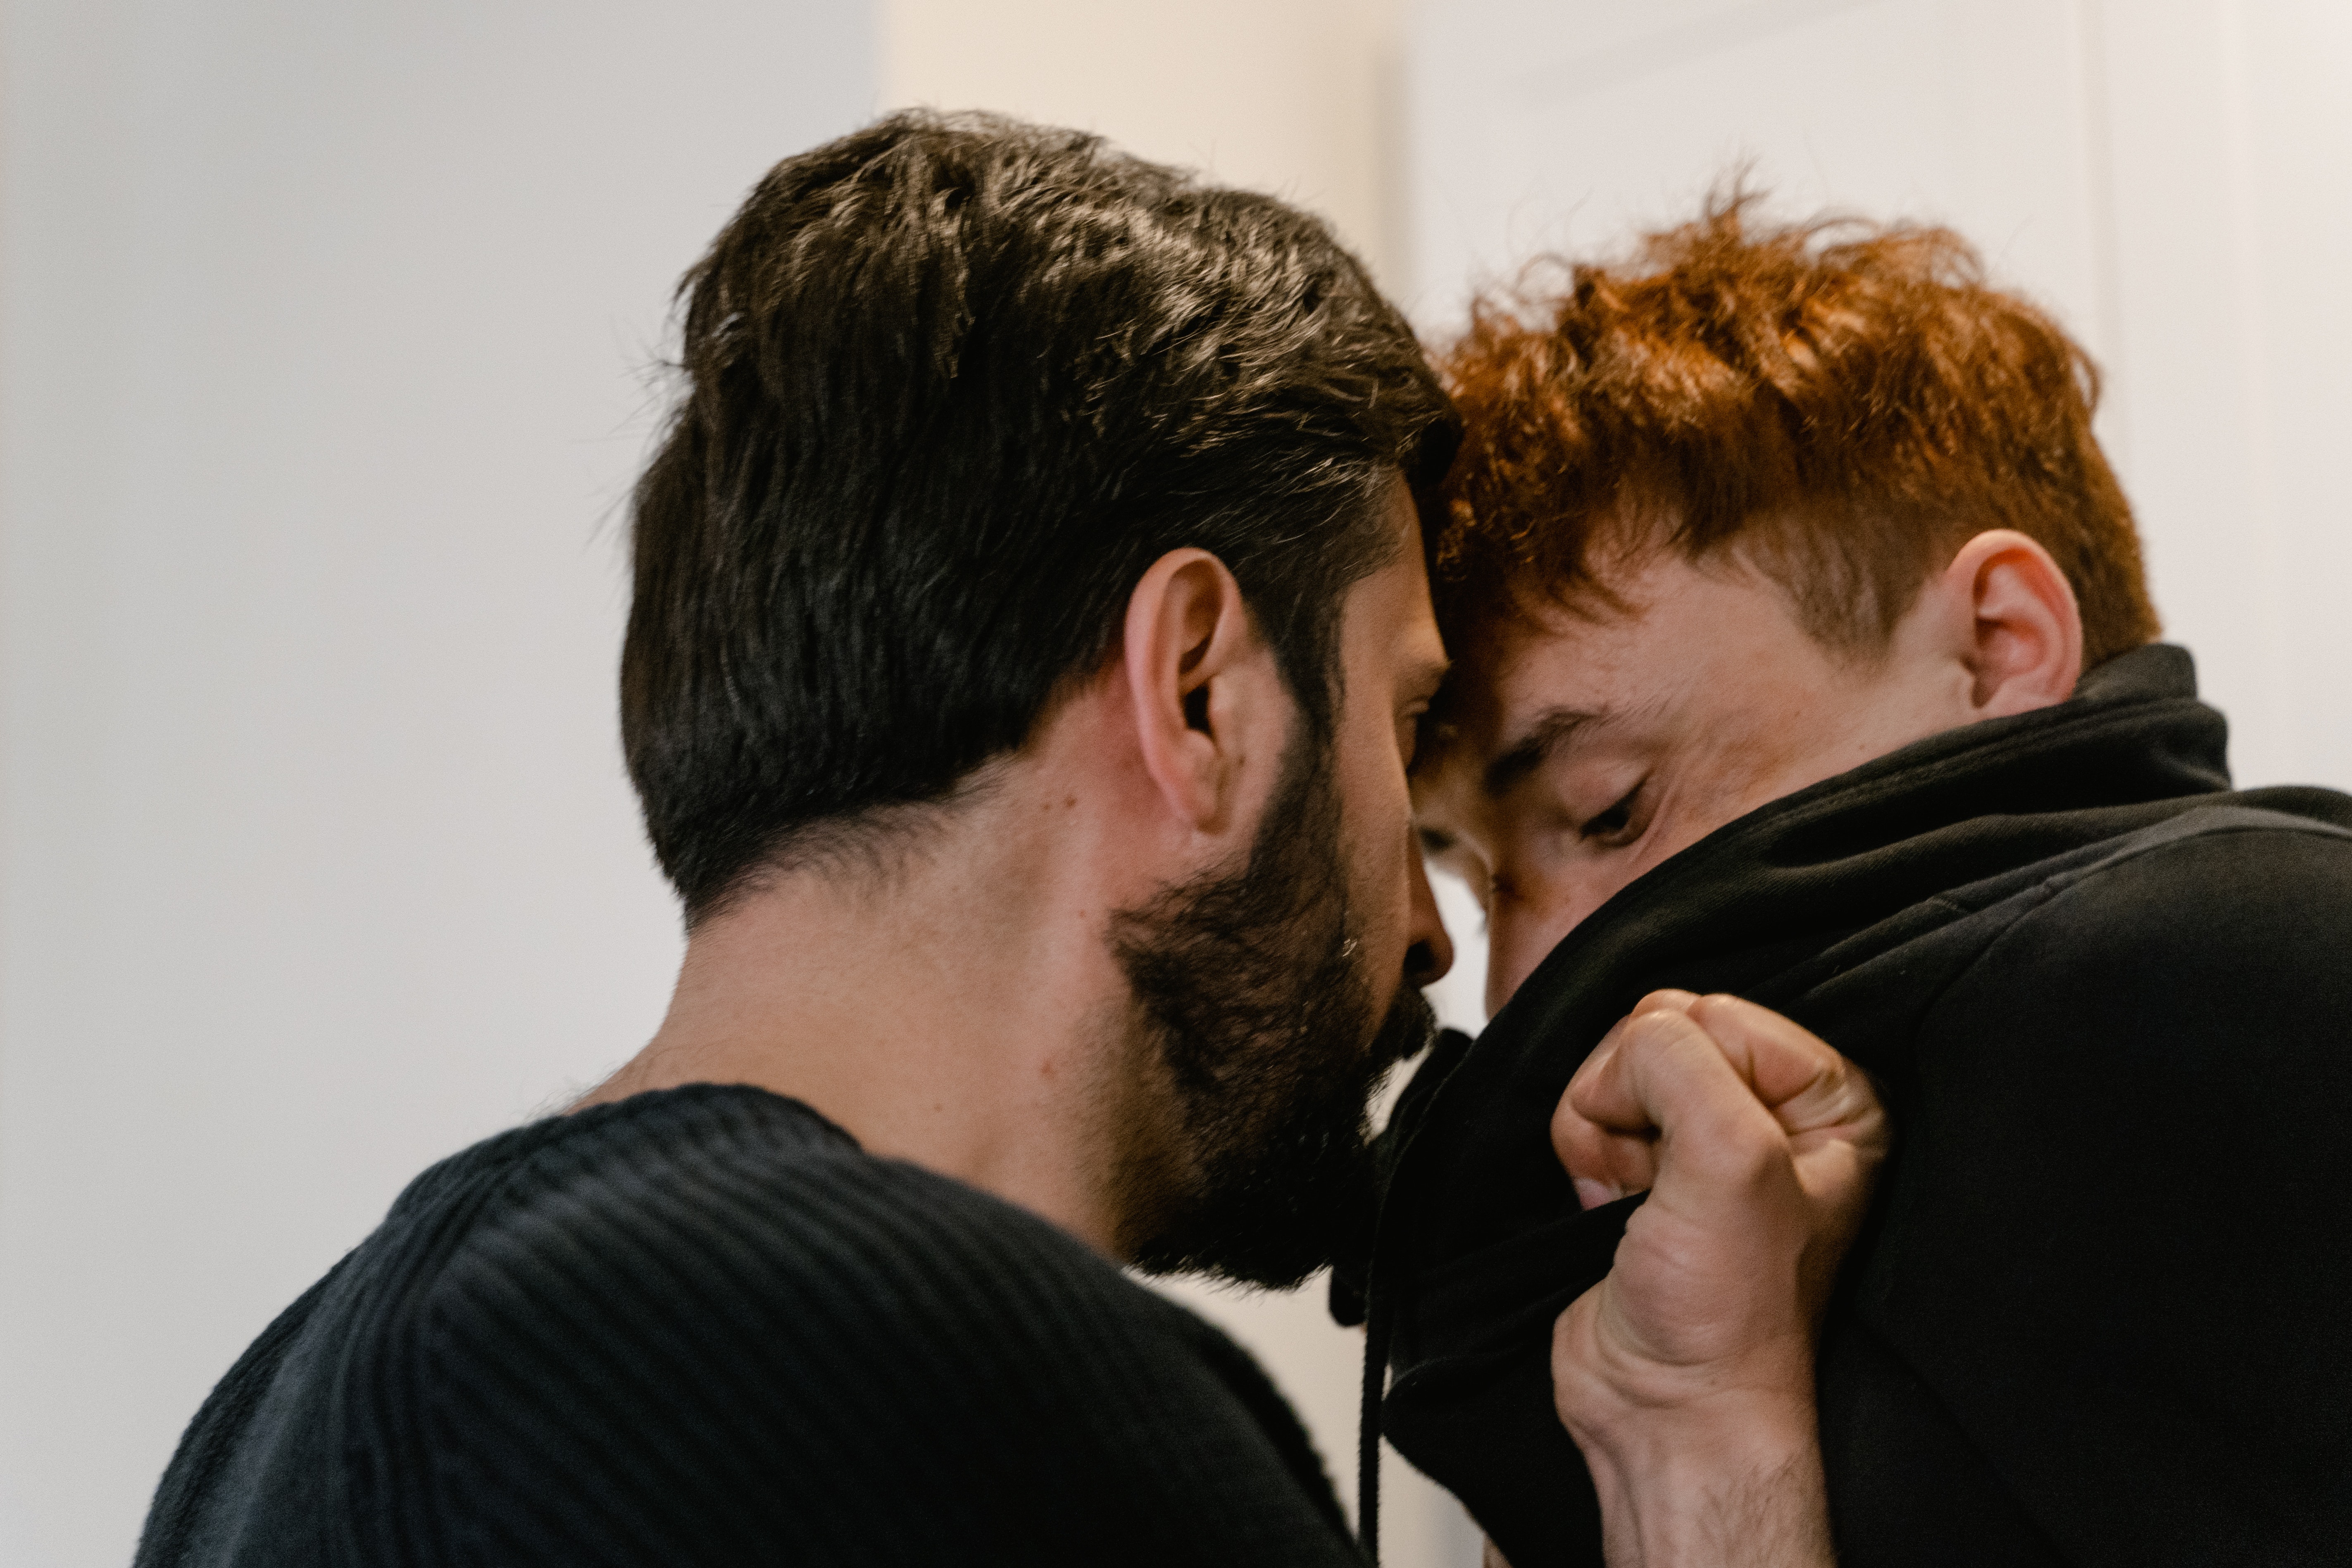 Two individuals in a close confrontation, with one appearing to whisper or speak intensely into the ear of the other who seems to be recoiling slightly. Both are partially obscured by the collar of a black jacket, indicating a potential struggle or aggressive interaction in an indoor setting with a plain white wall in the background.